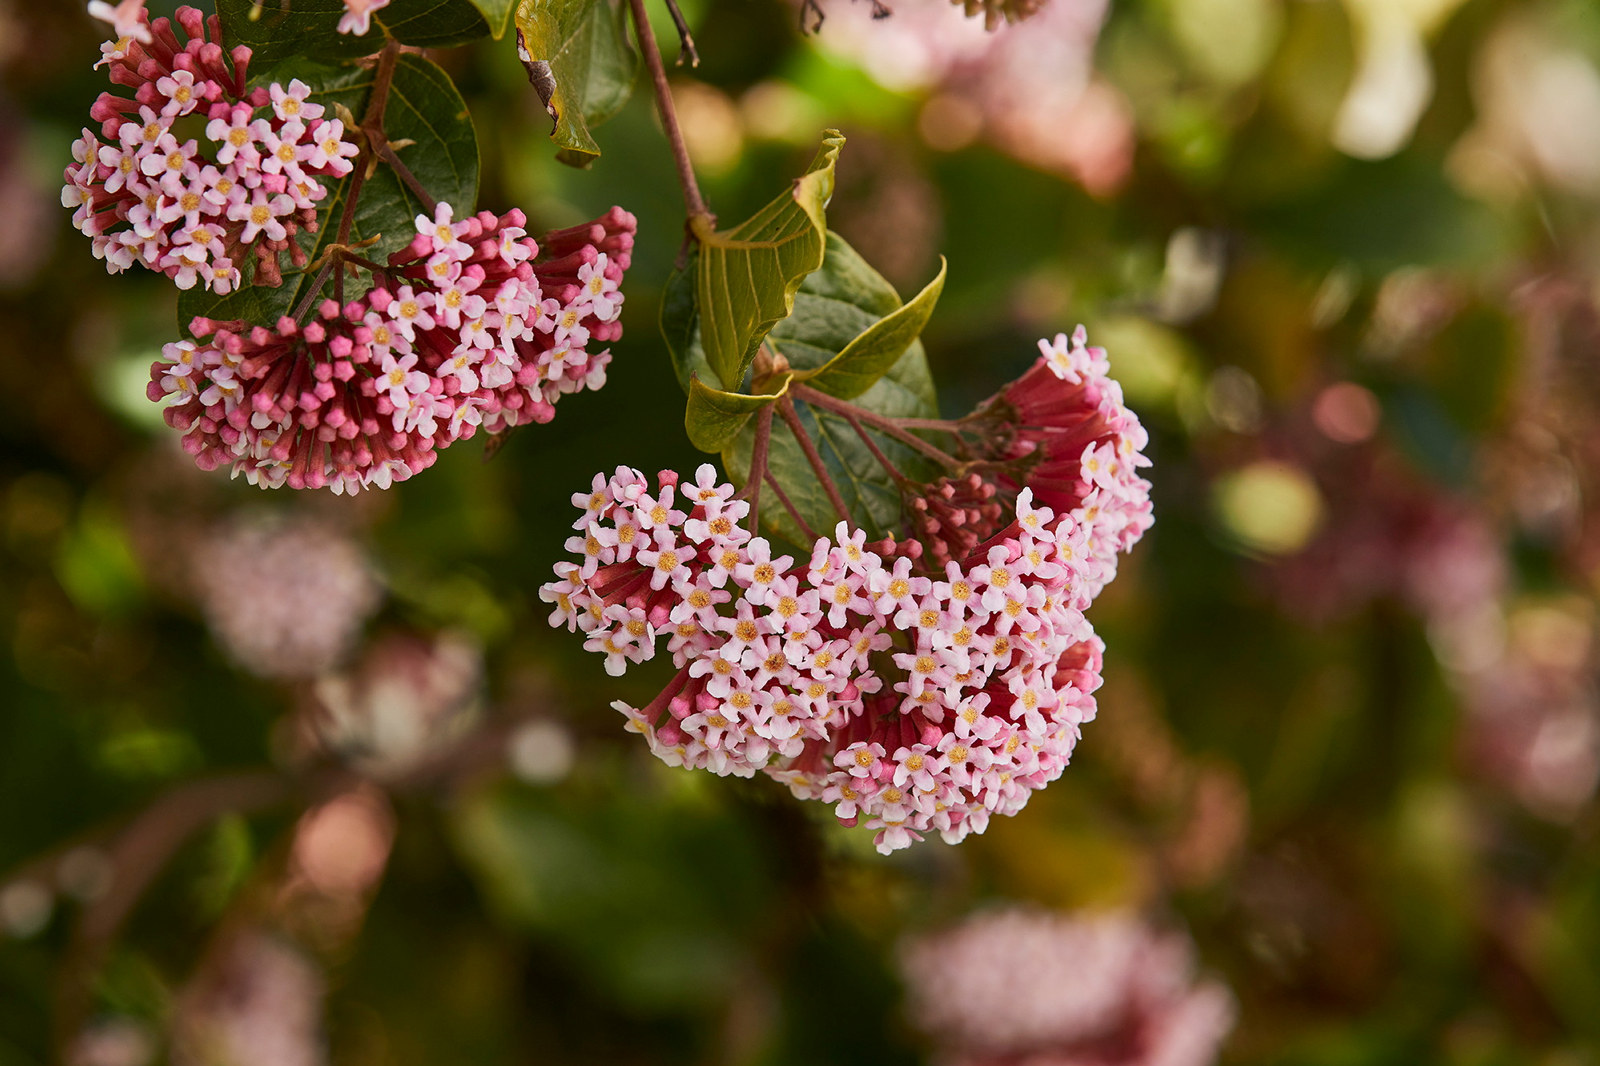 Pink clustered flowers.